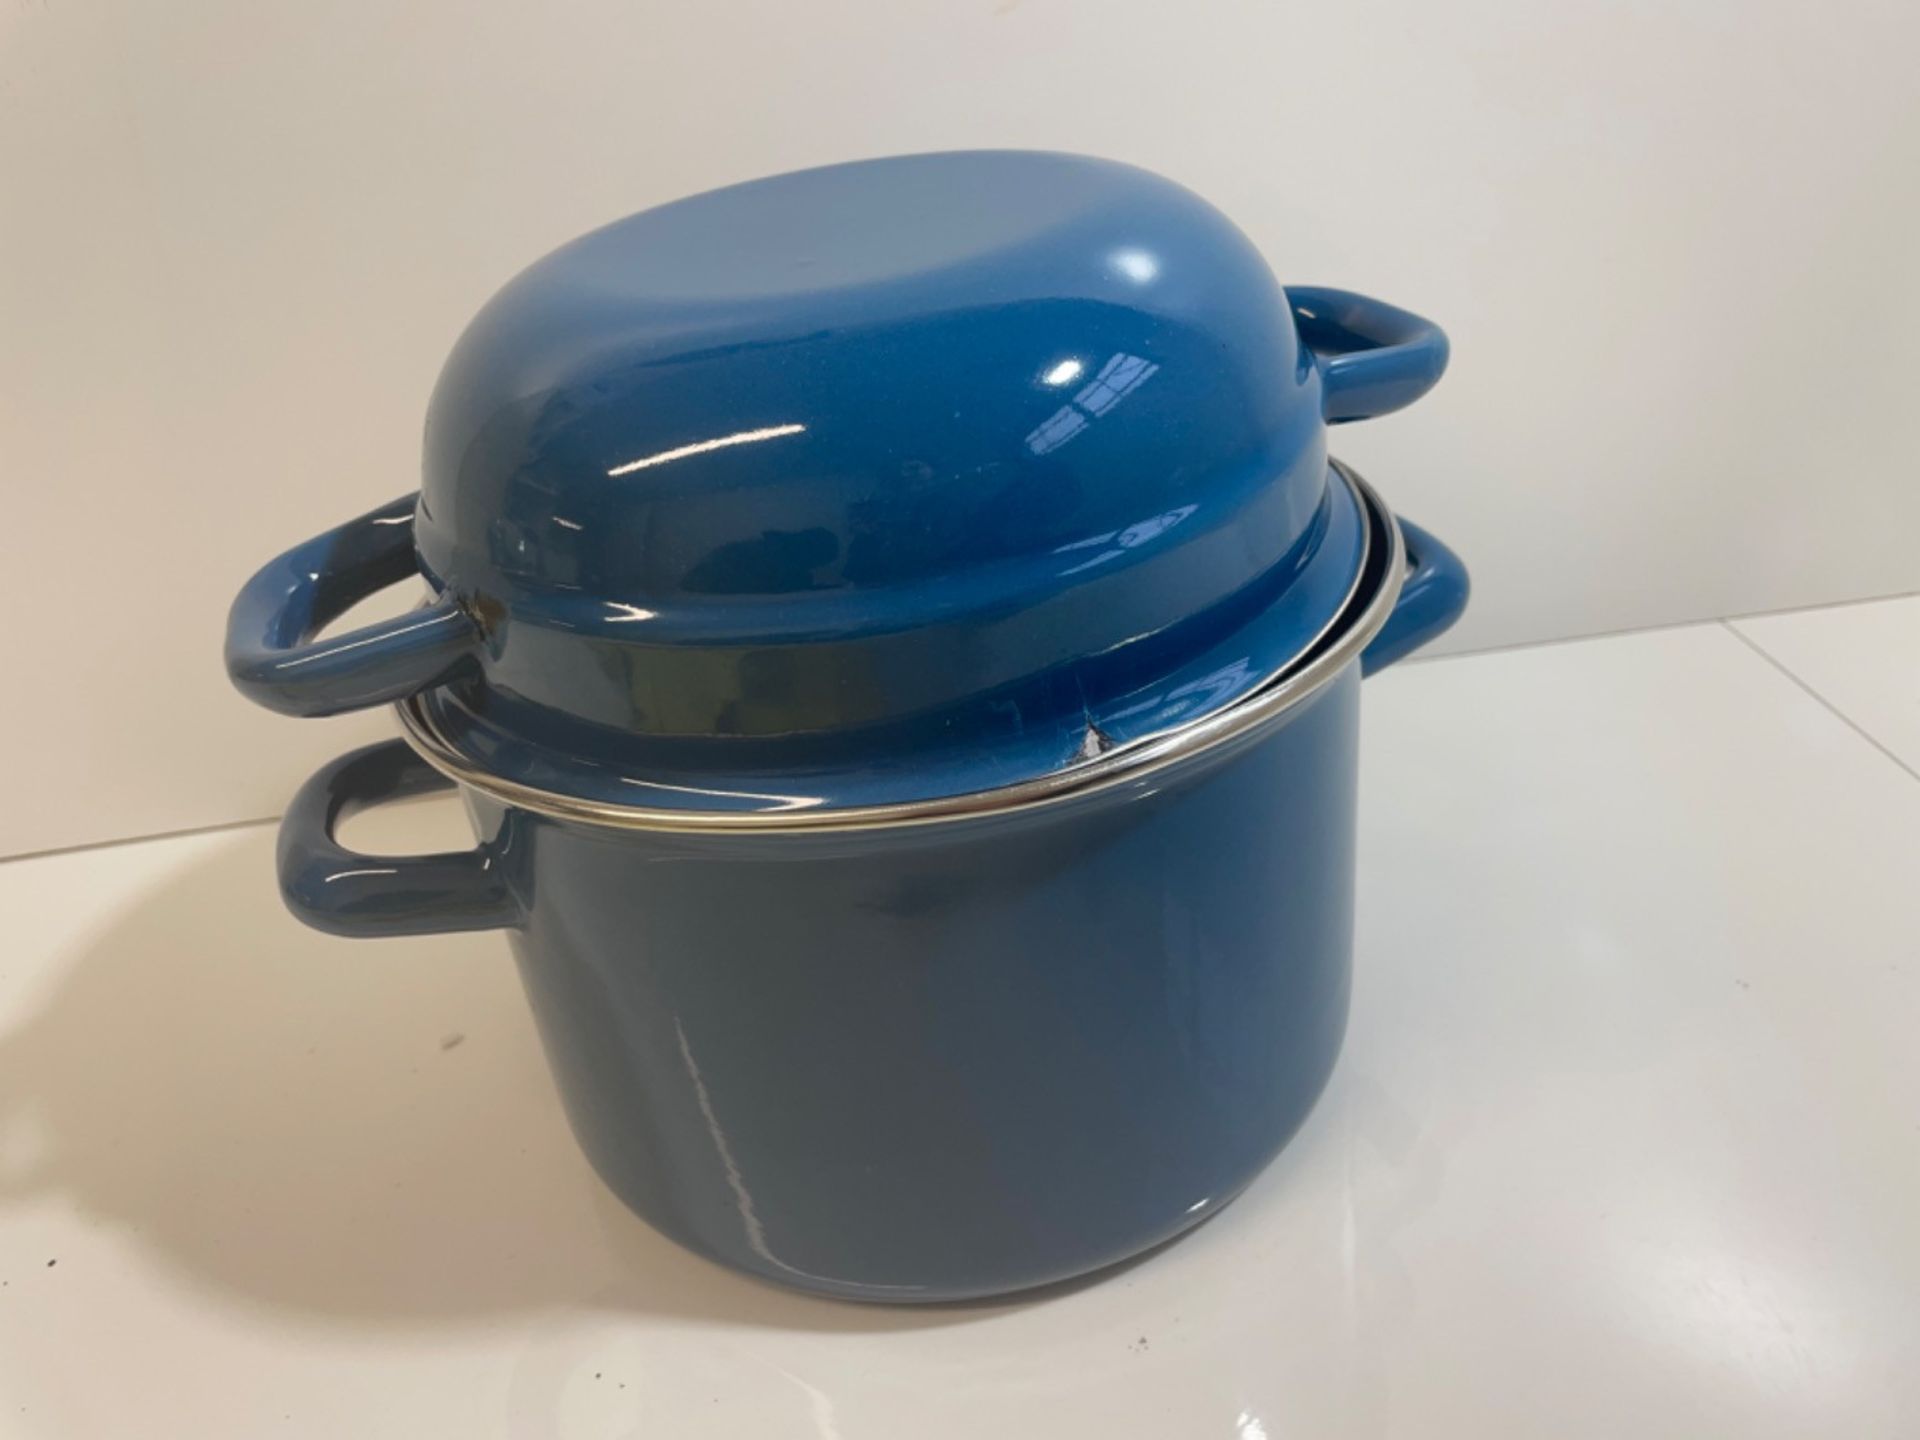 IBILI Mussels Pot, Petrol, 18 cm, Enamelled Steel, Suitable for Induction Hobs - Image 2 of 3